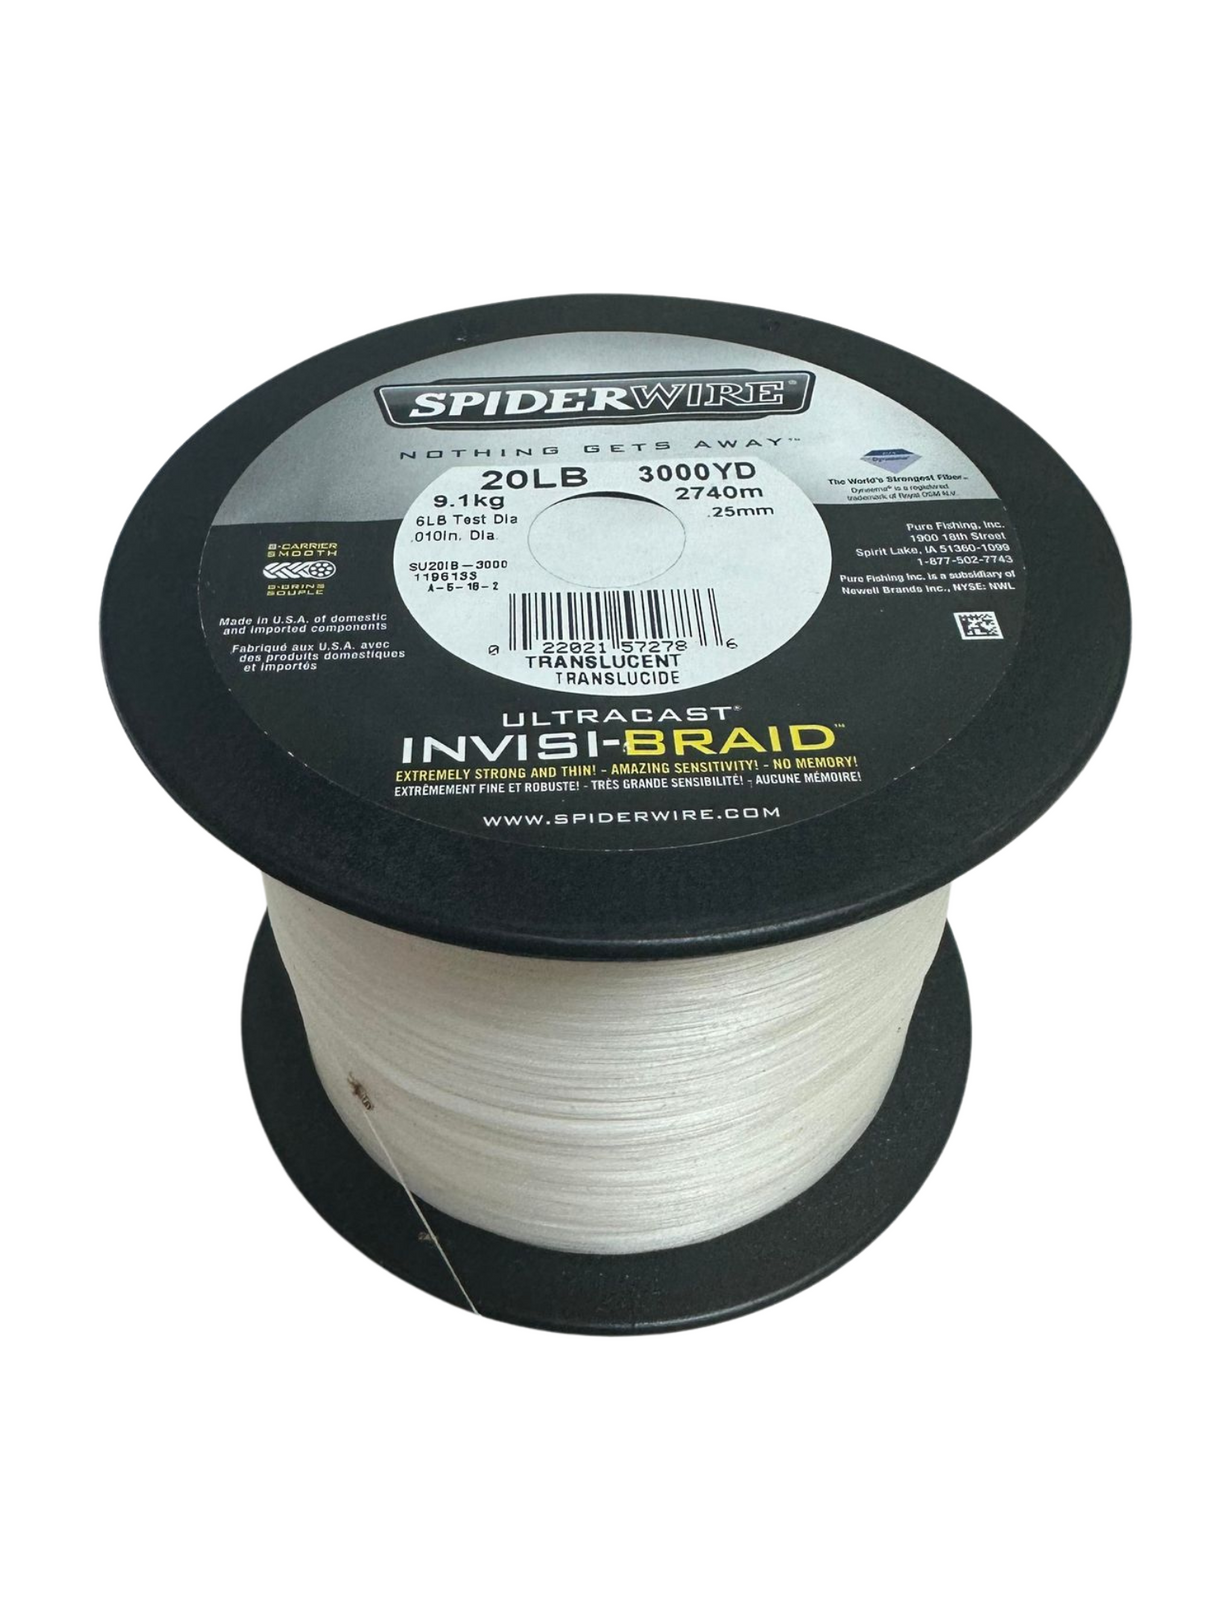 Spiderwire Fishing Line in Fishing Tackle 